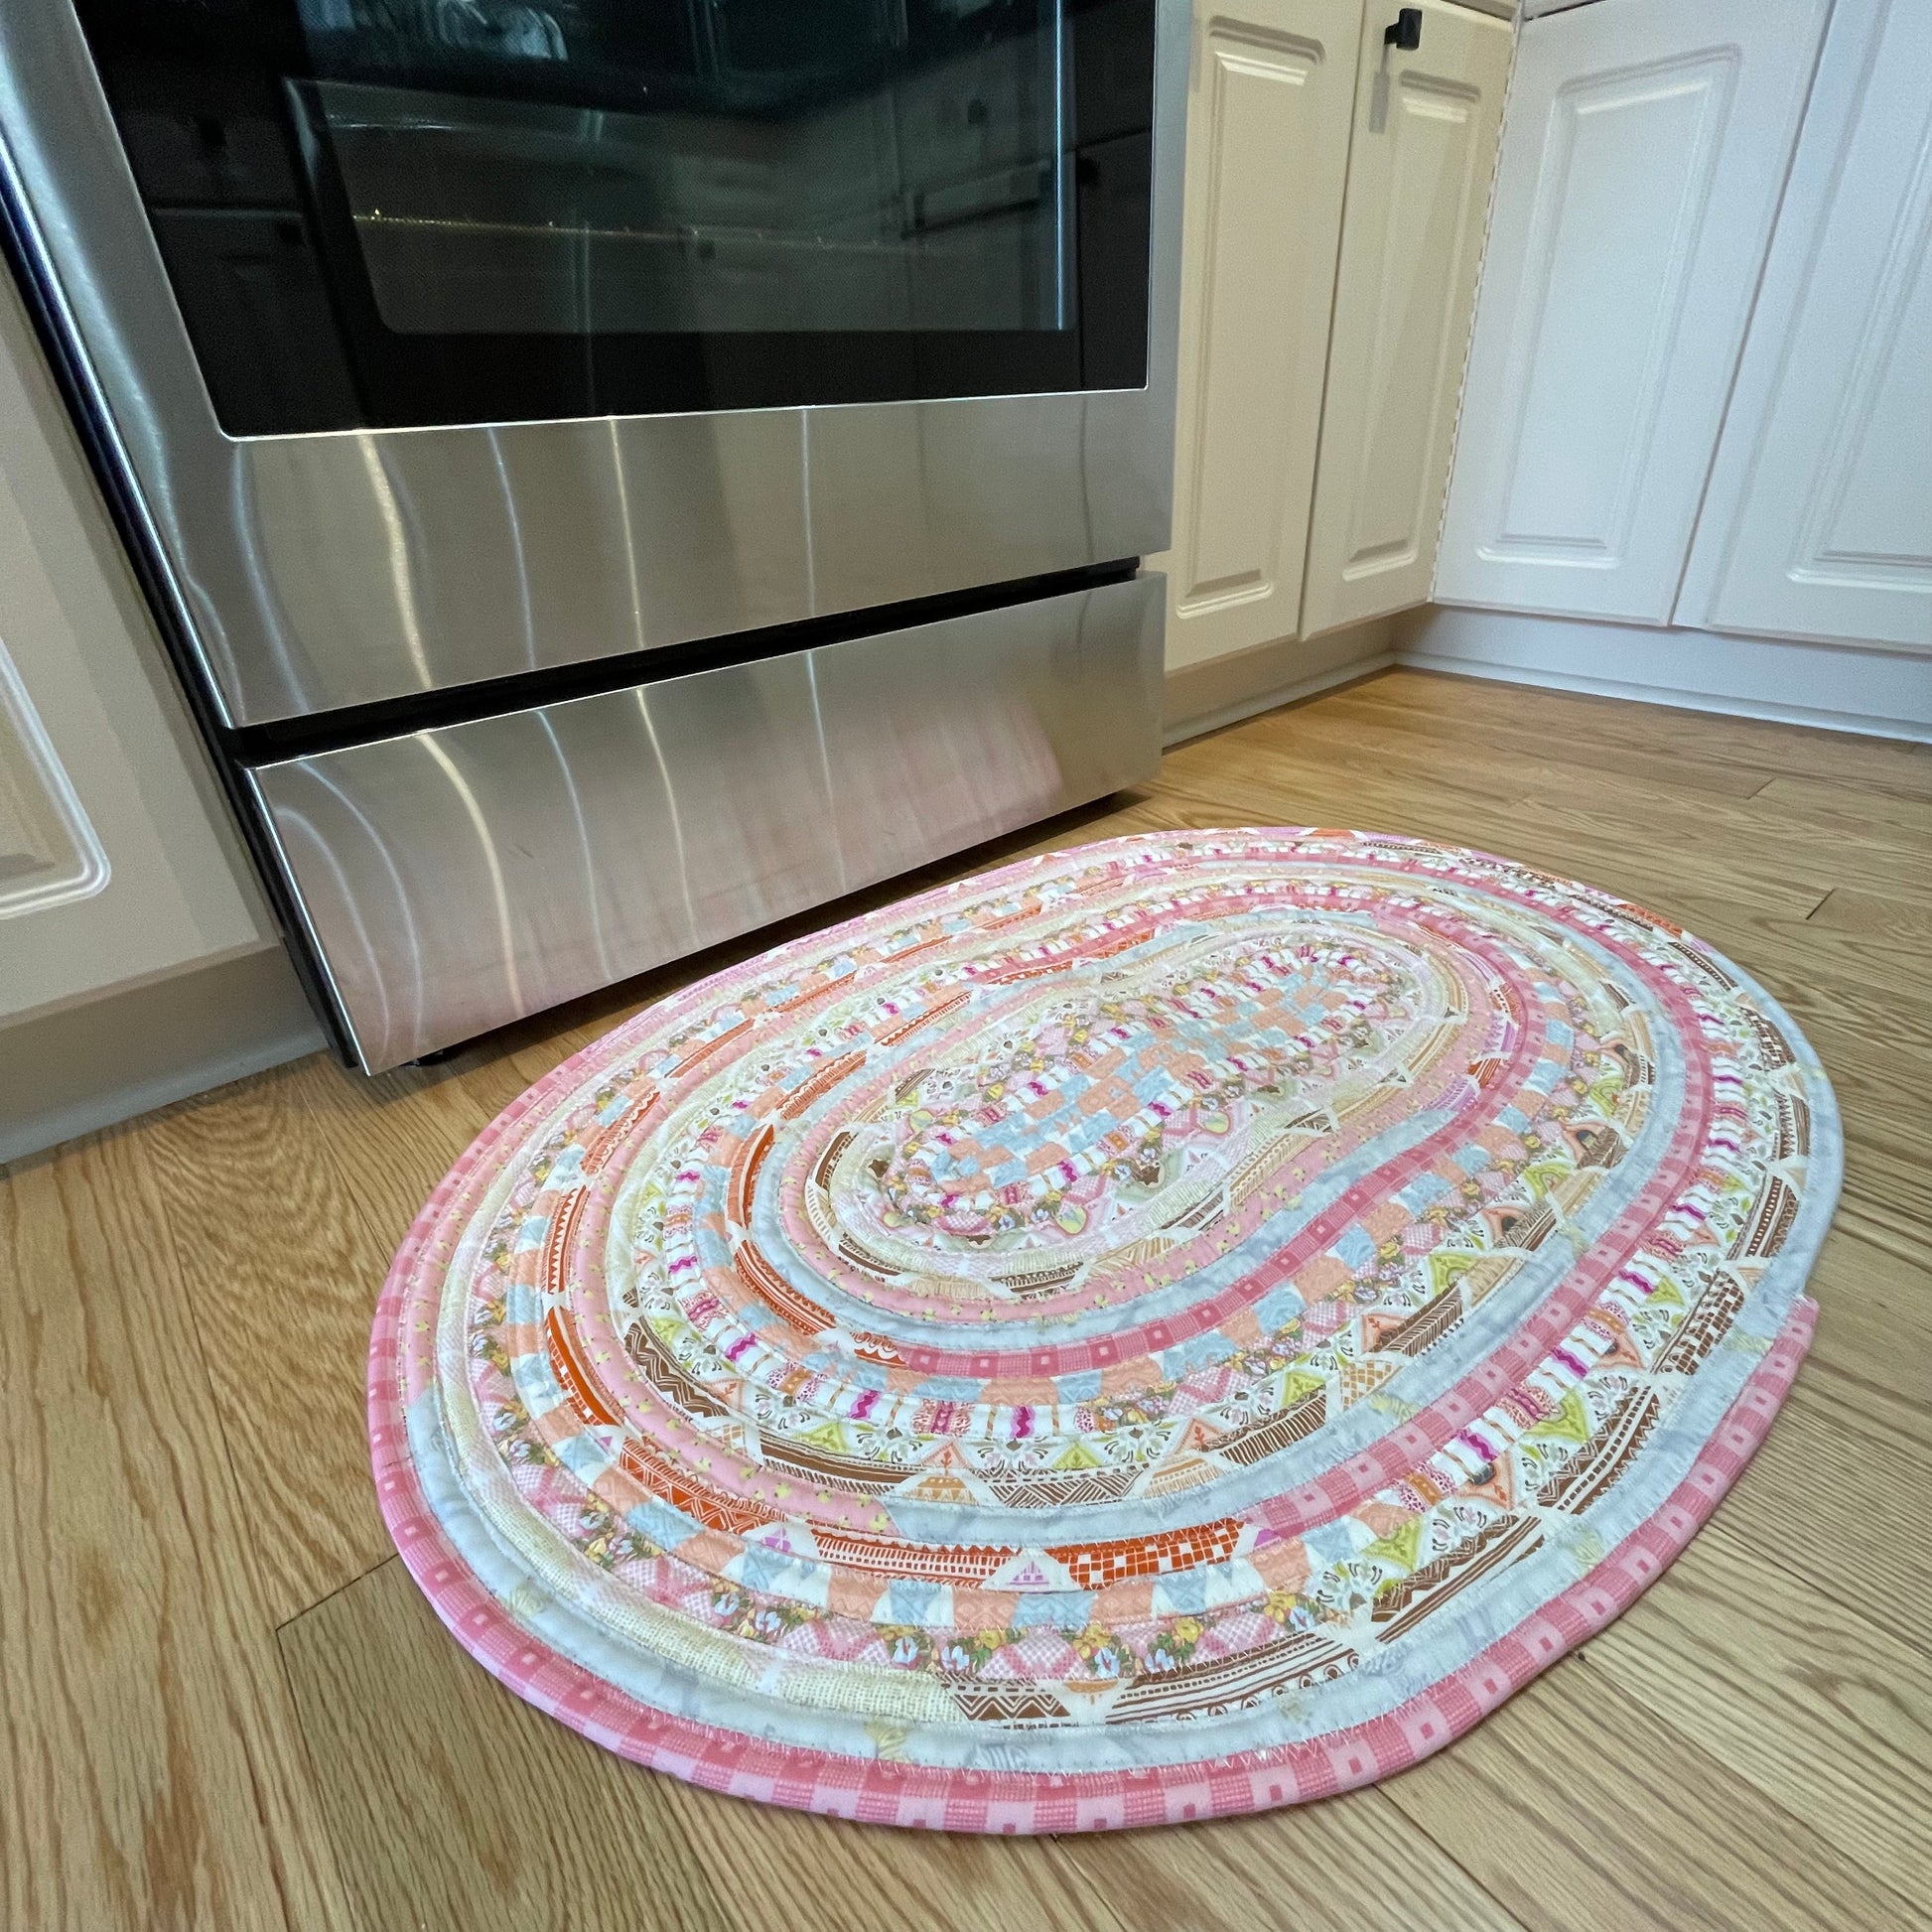 Handmade washable pink cotton Jelly Roll Rug for Kitchen, bedside or bathroom. Made in Canada